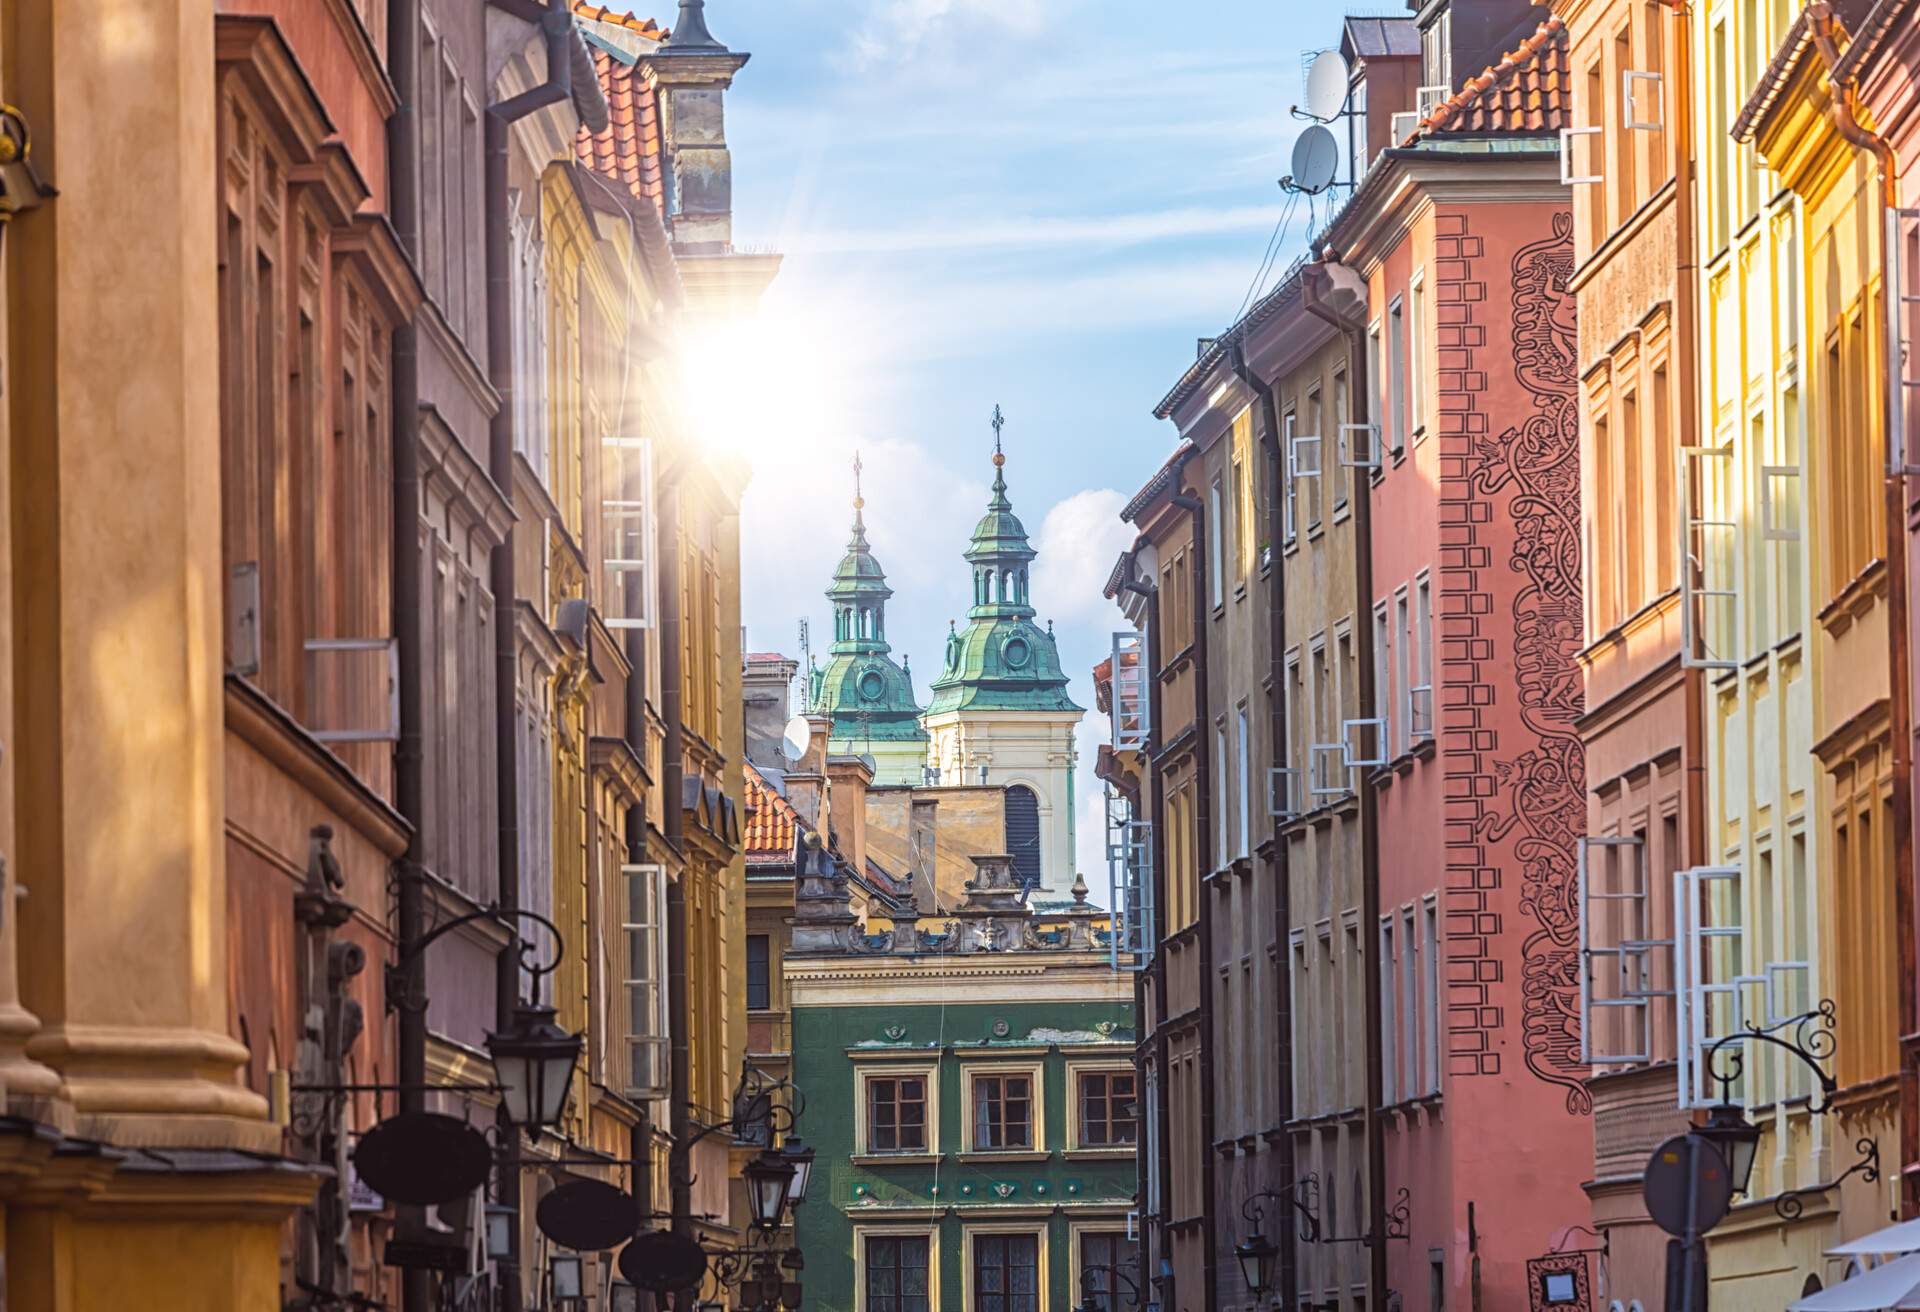 DEST_POLAND_WARSAW_OLD-TOWN_GettyImages-937364156